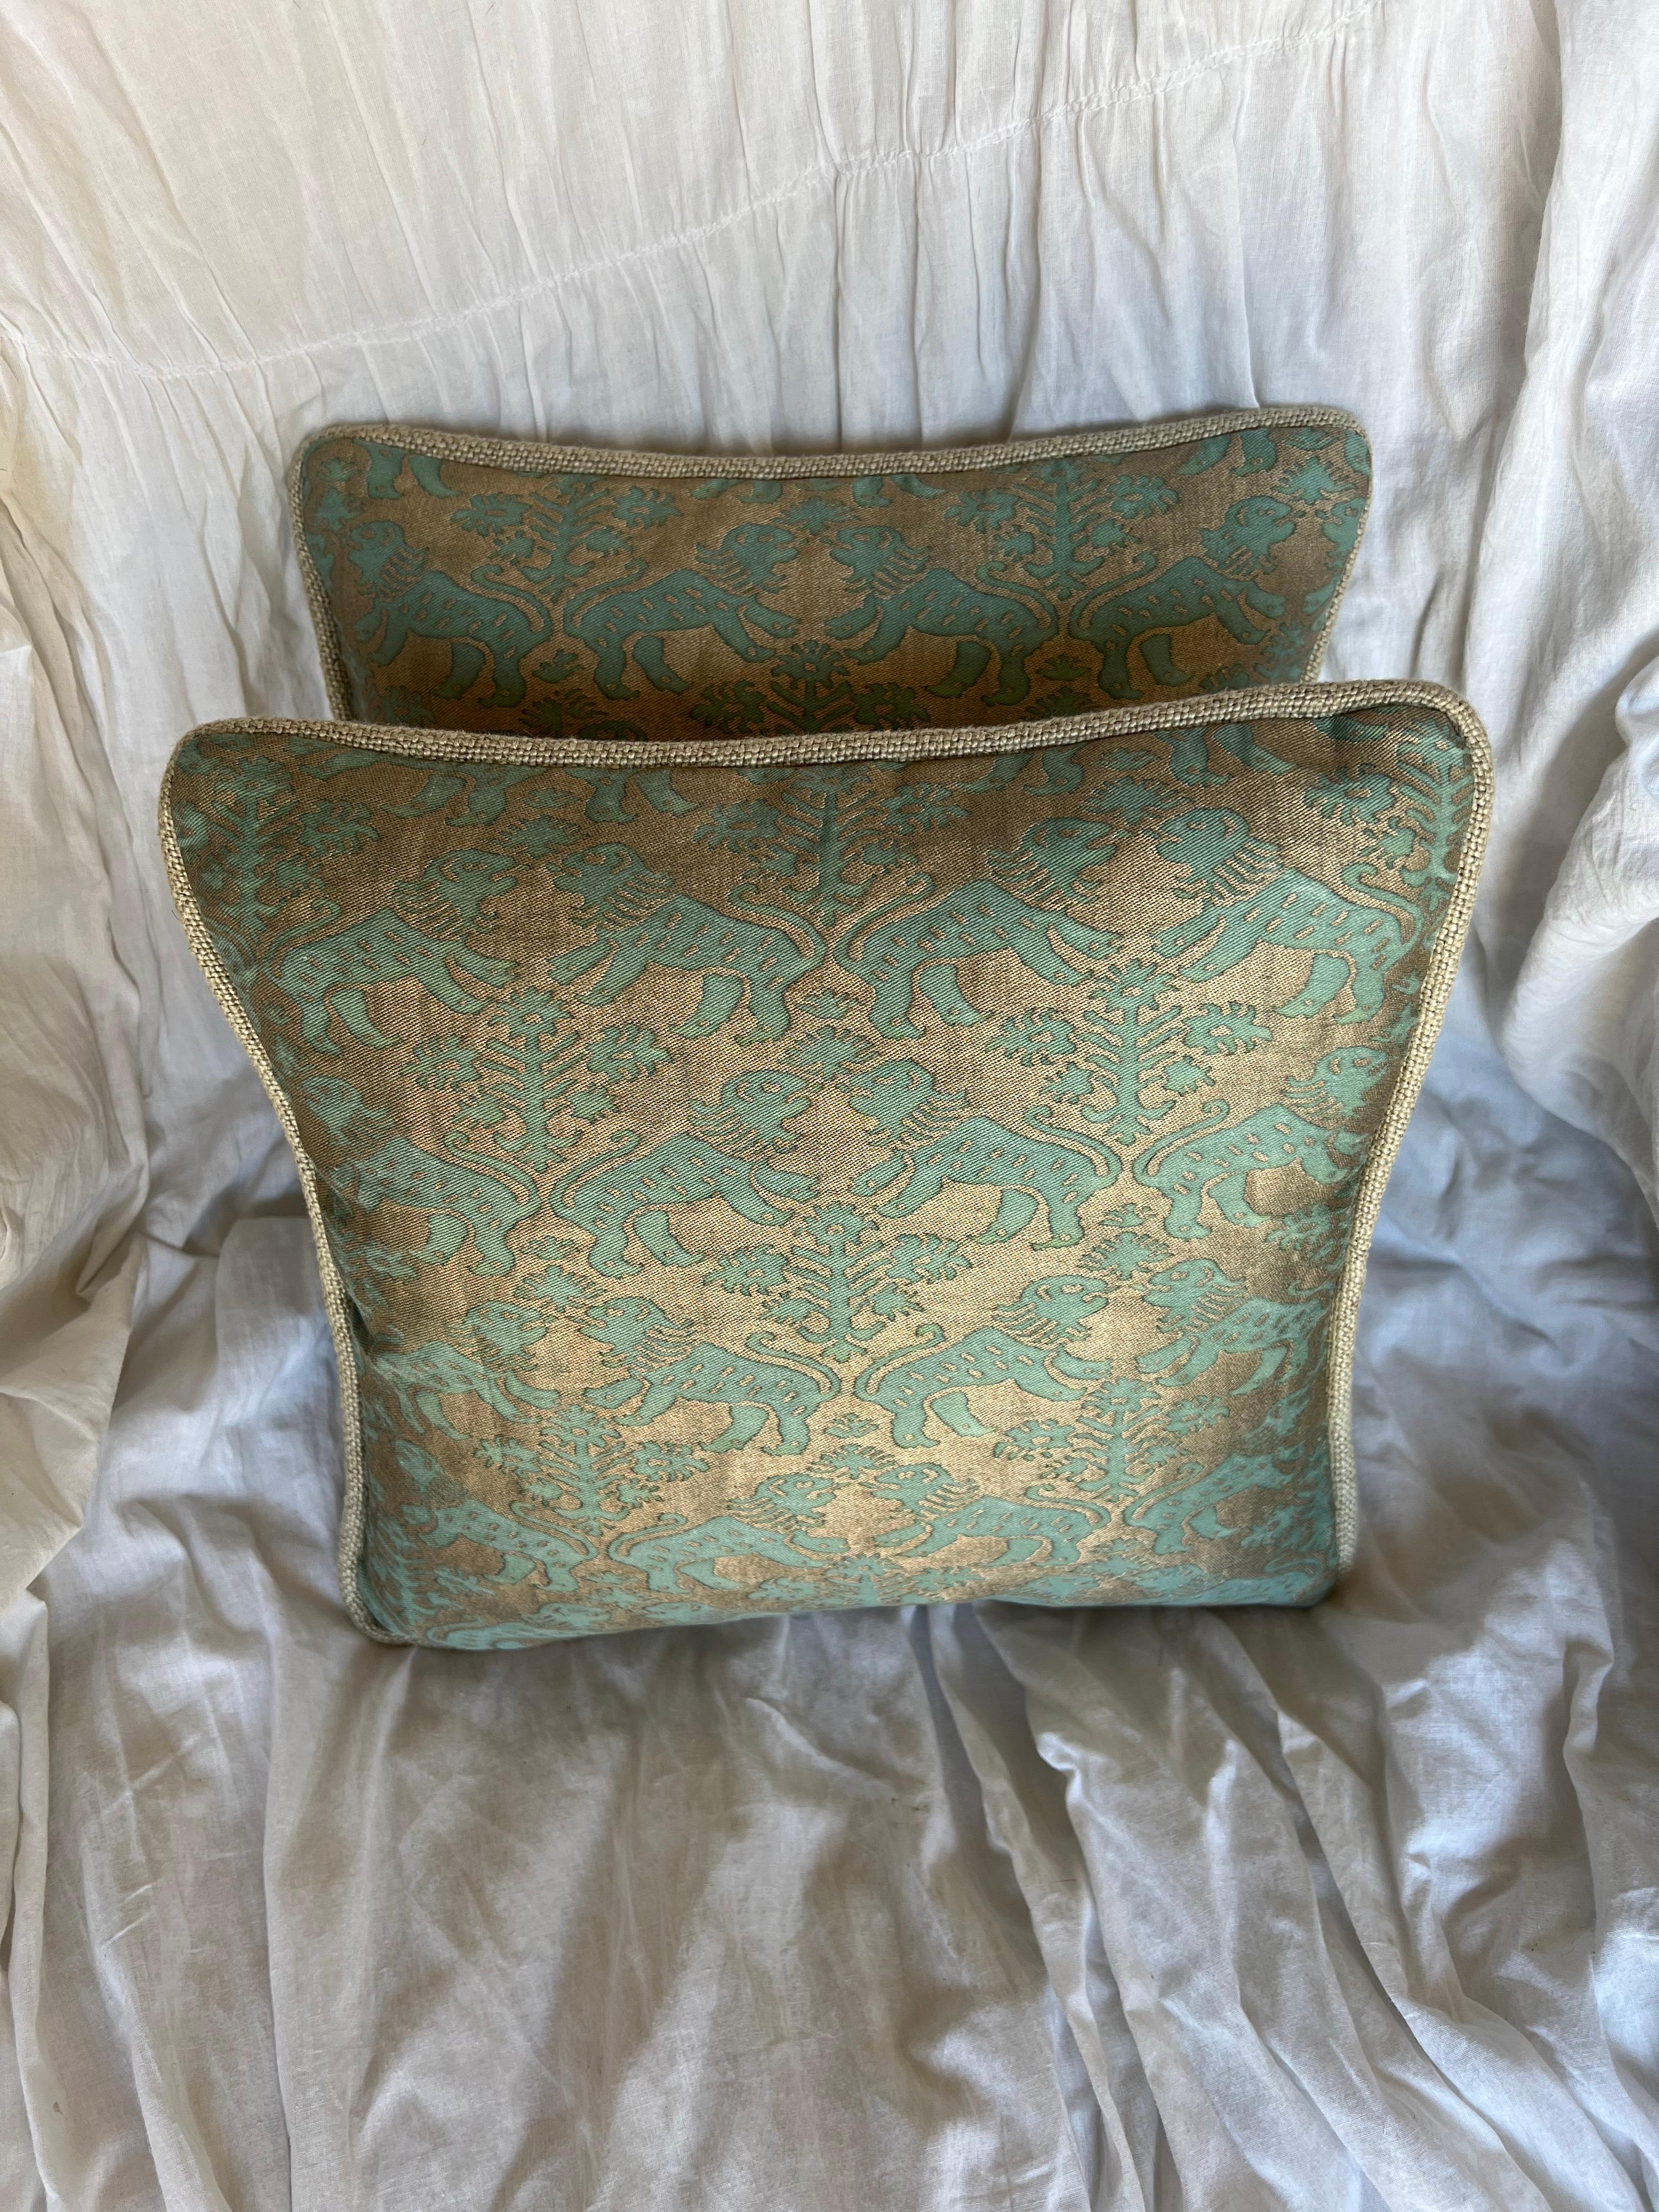 Pair of custom pillows made with vintage Richeleau patterned Fortuny textile fronts and silk backs. Zipper closures, down inserts.